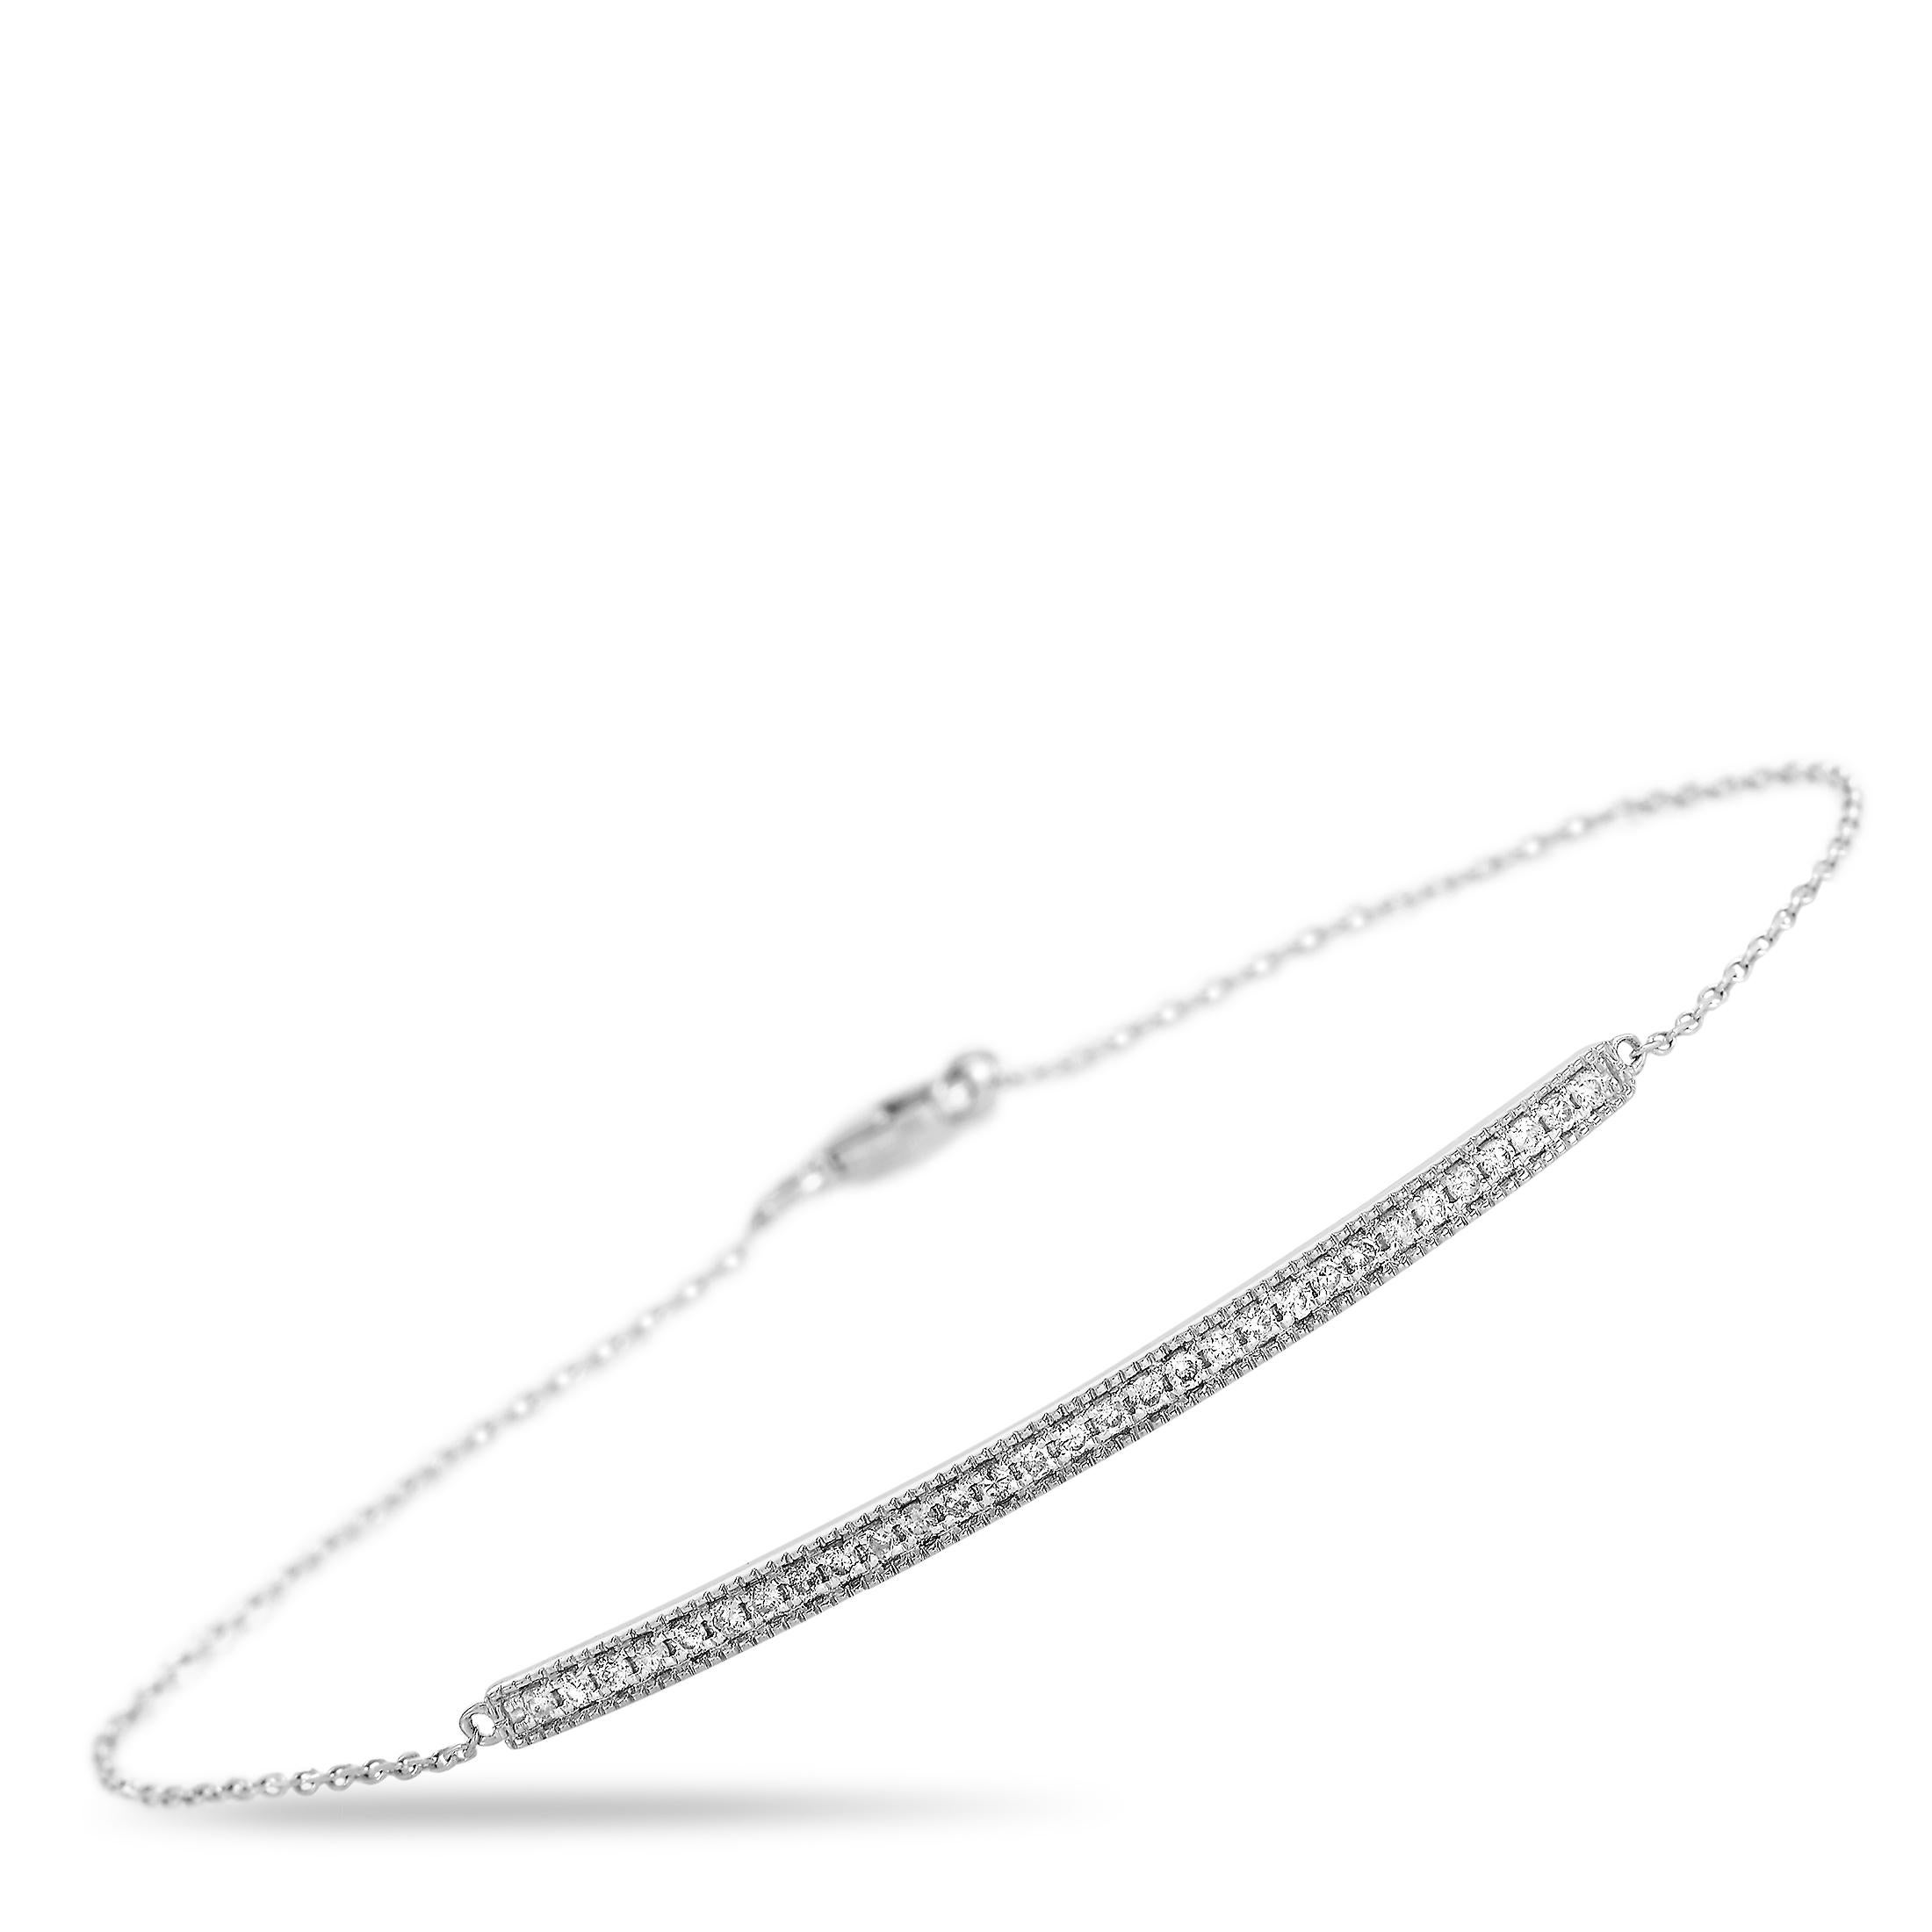 Lb Exclusive 14k White Gold 0.25 Carat Diamond Bracelet In New Condition For Sale In Southampton, PA